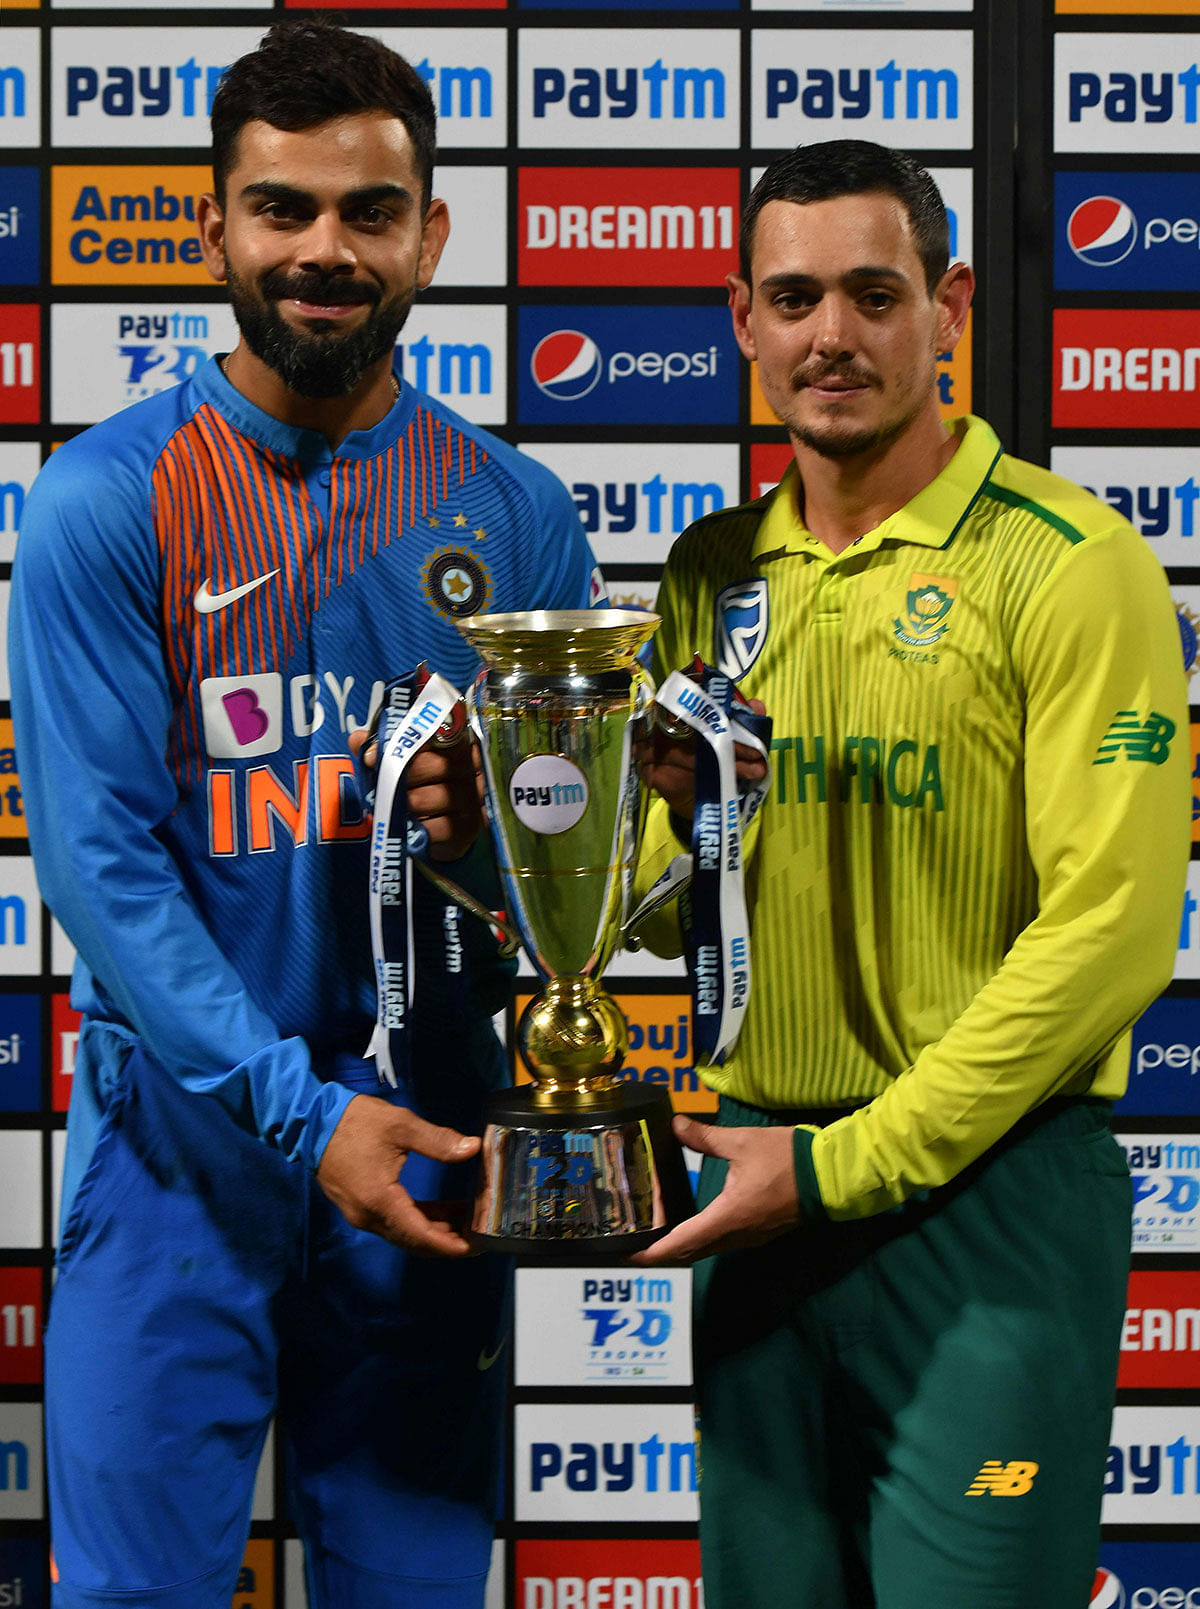 Indian cricket team captain Virat Kohli (L) and South African captain Quinto de Kock (R) share the trophy after the third Twenty20 international cricket match of a three-match series between India and South Africa ended with a draw, at the M. Chinnaswamy Stadium in Bangalore on 22 September 2019. Photo: AFP